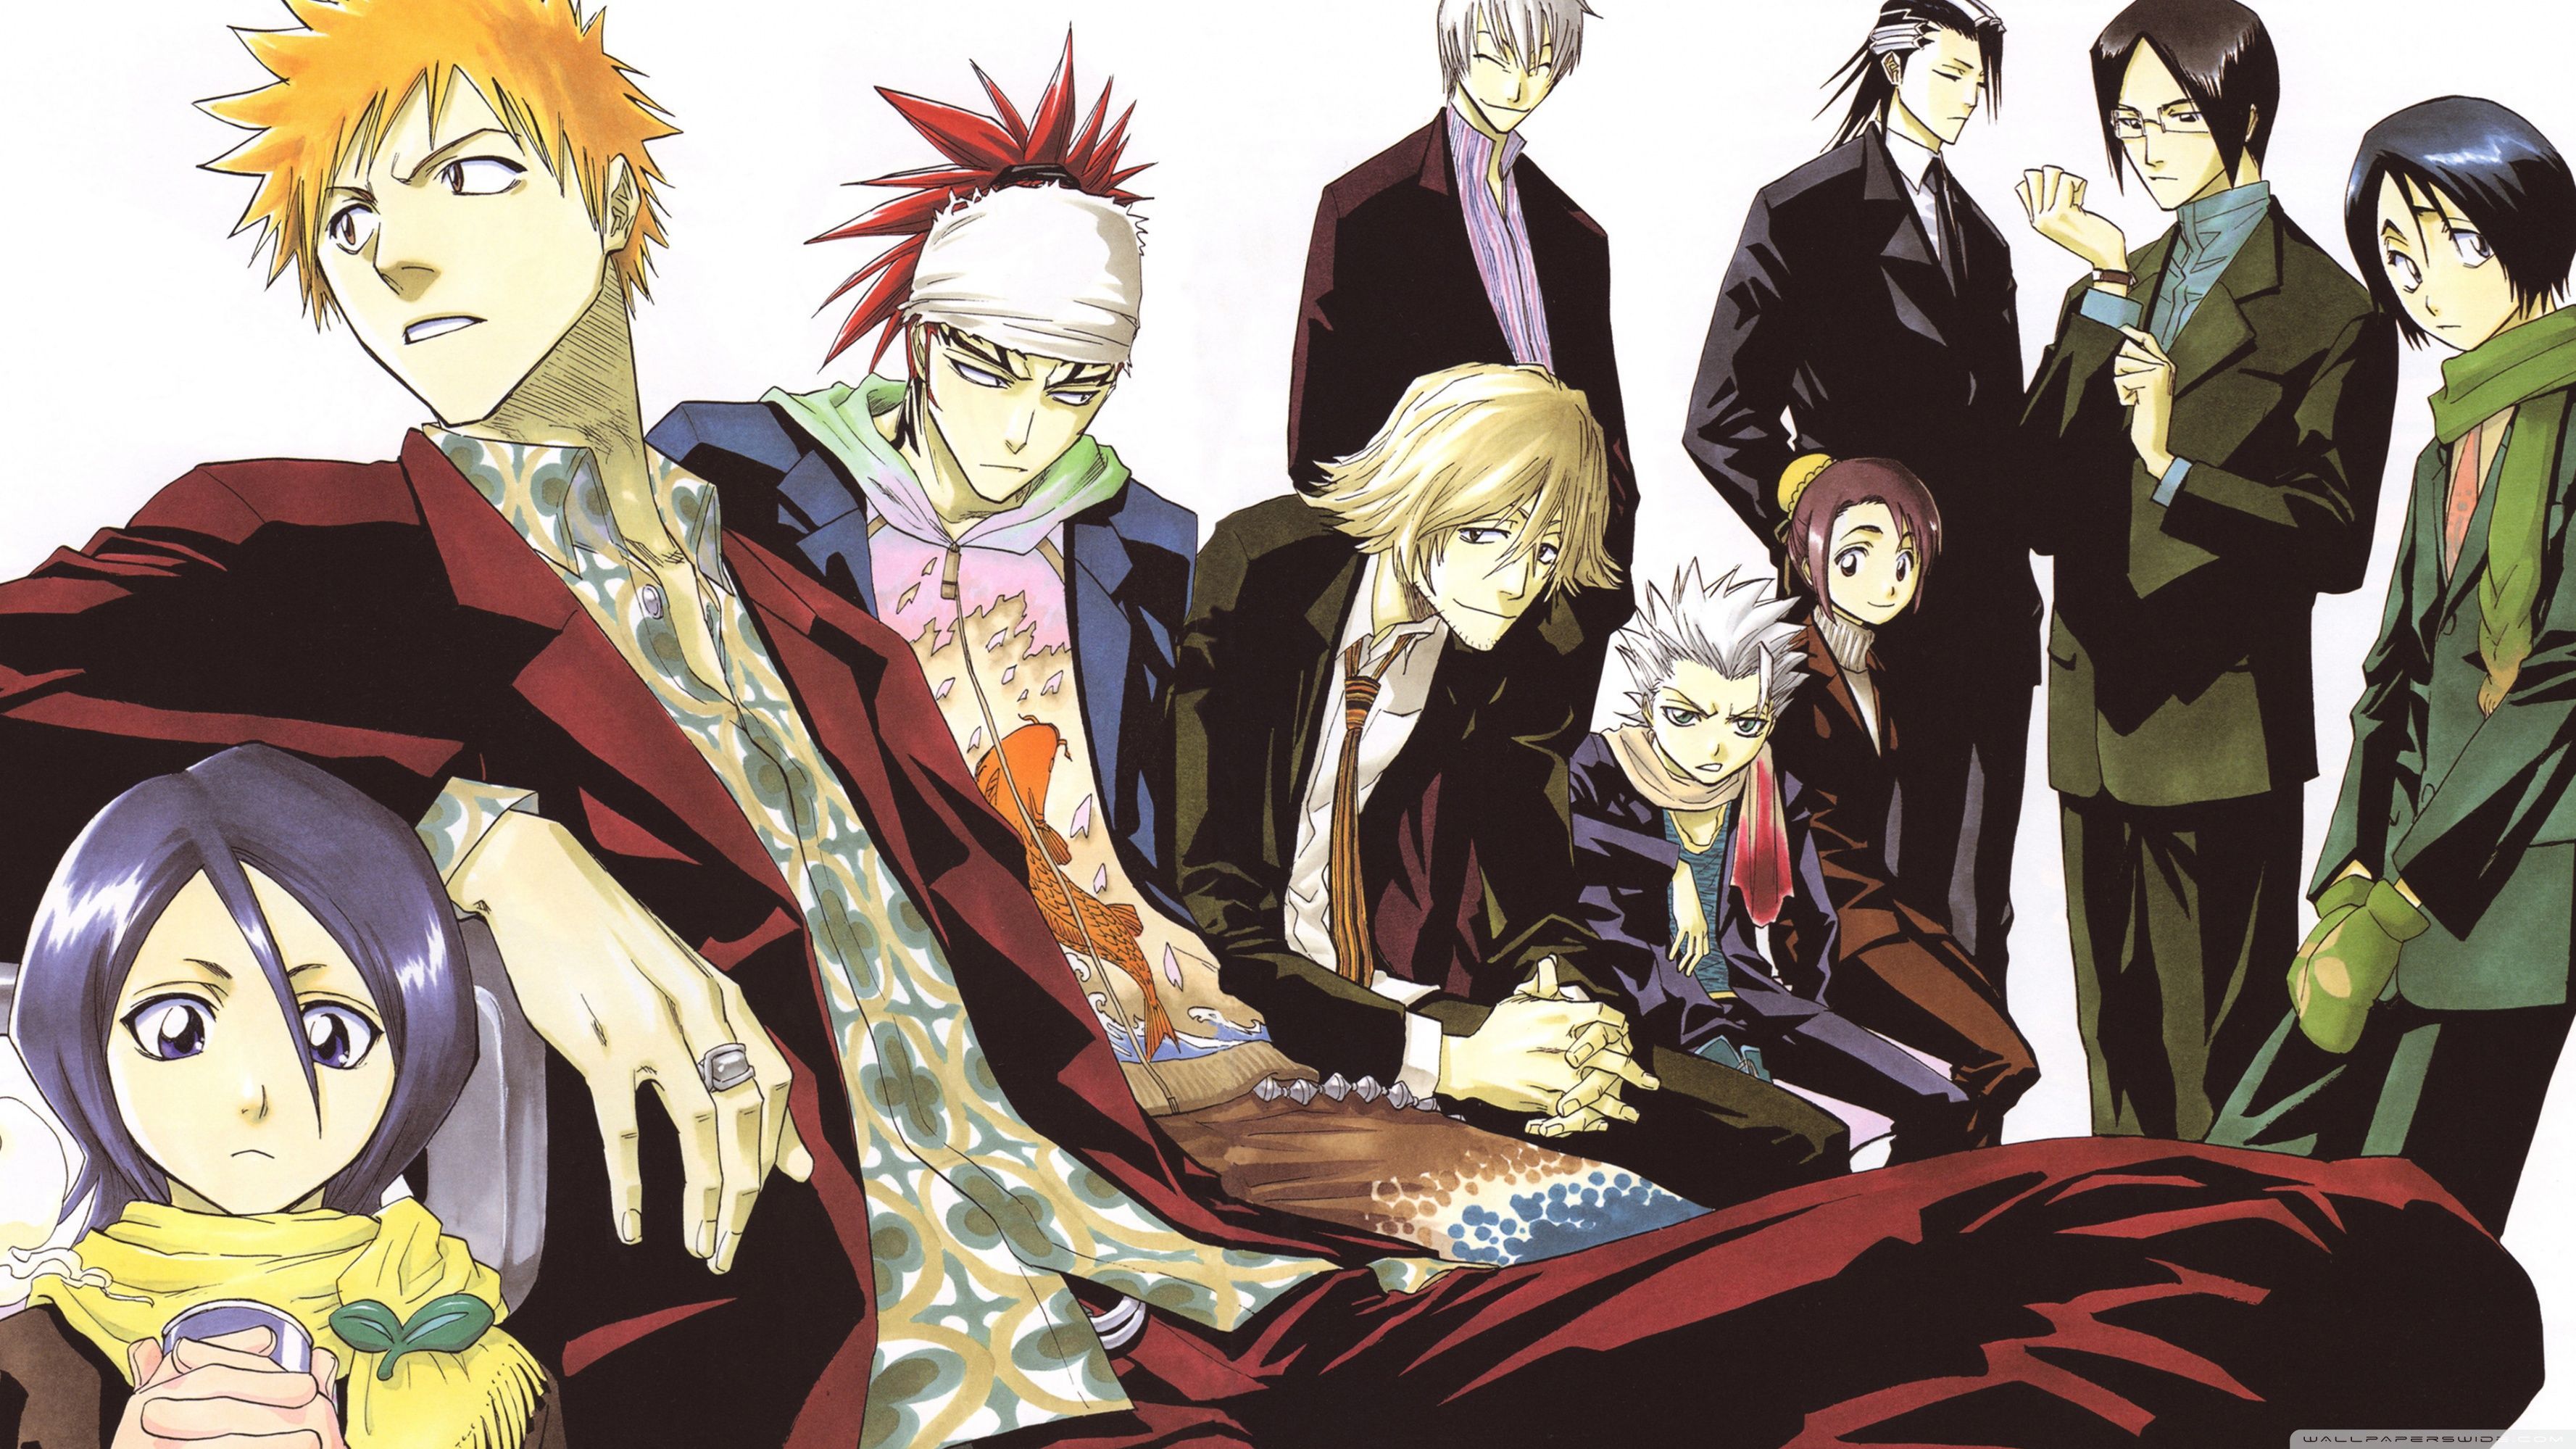 Bleach Characters Wallpapers on WallpaperDog